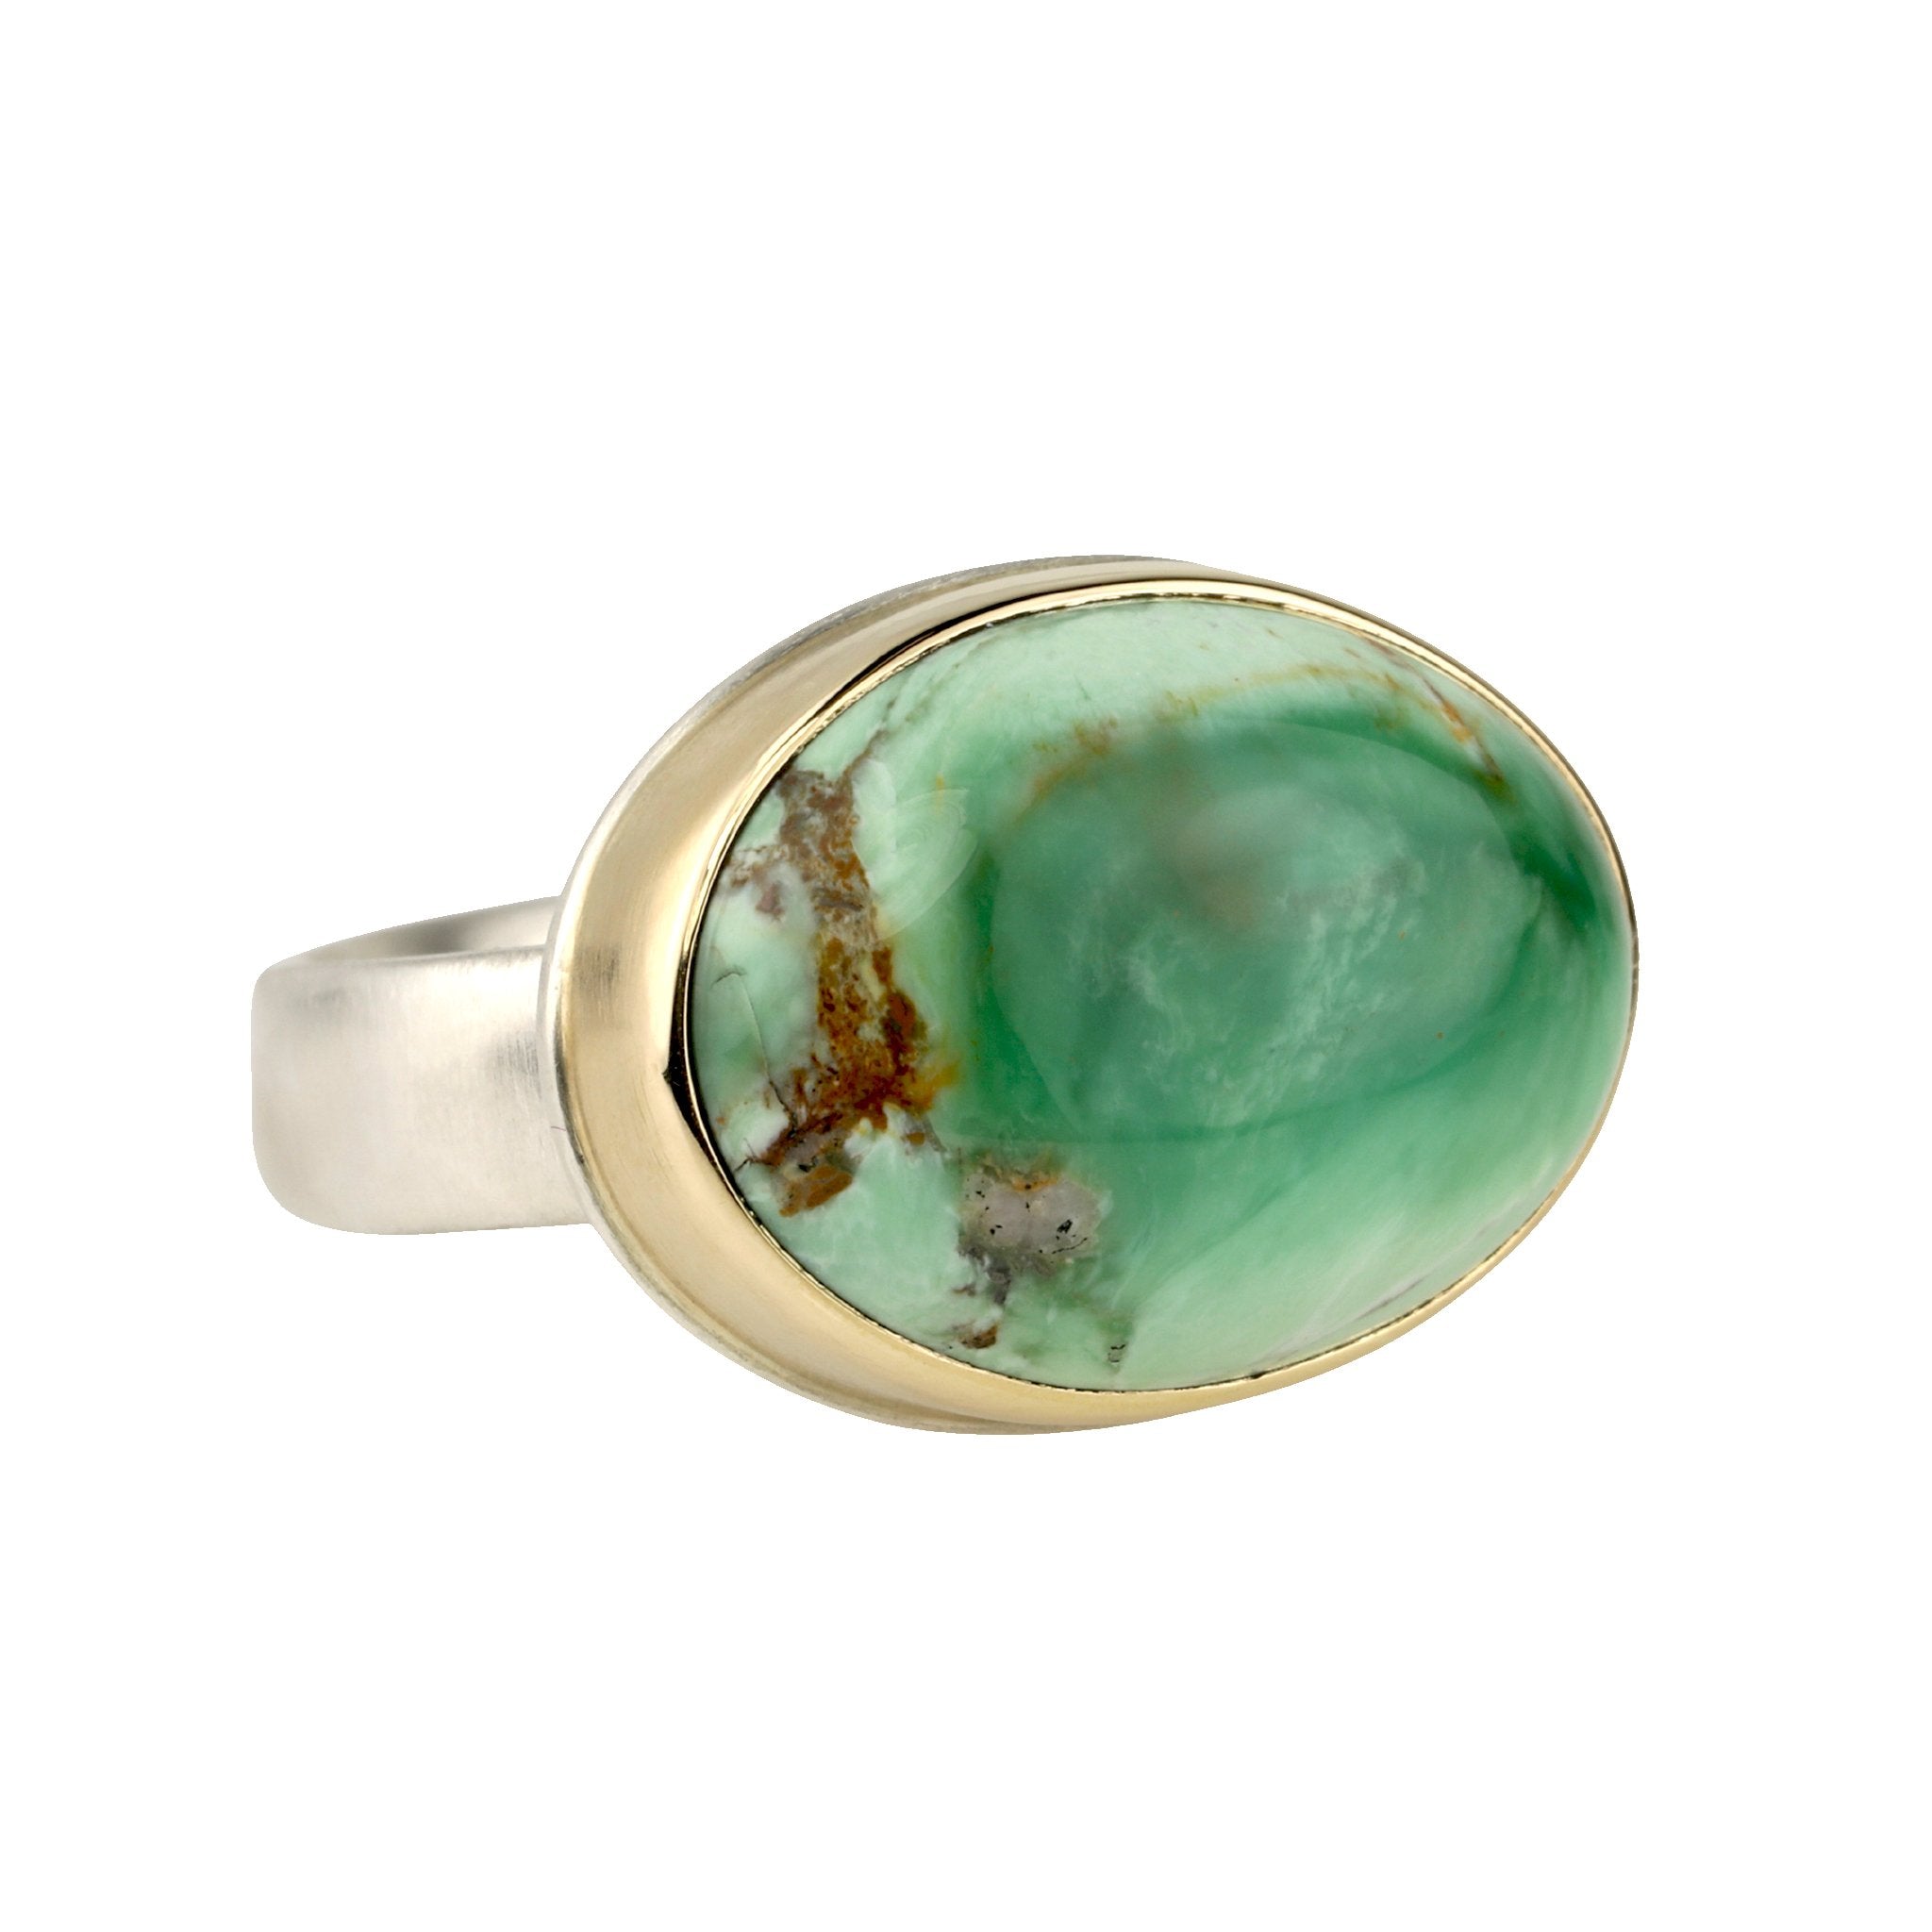 Jamie Joseph  Rectangular Australian Crystal Opal All Gold Ring at Voiage  Jewelry